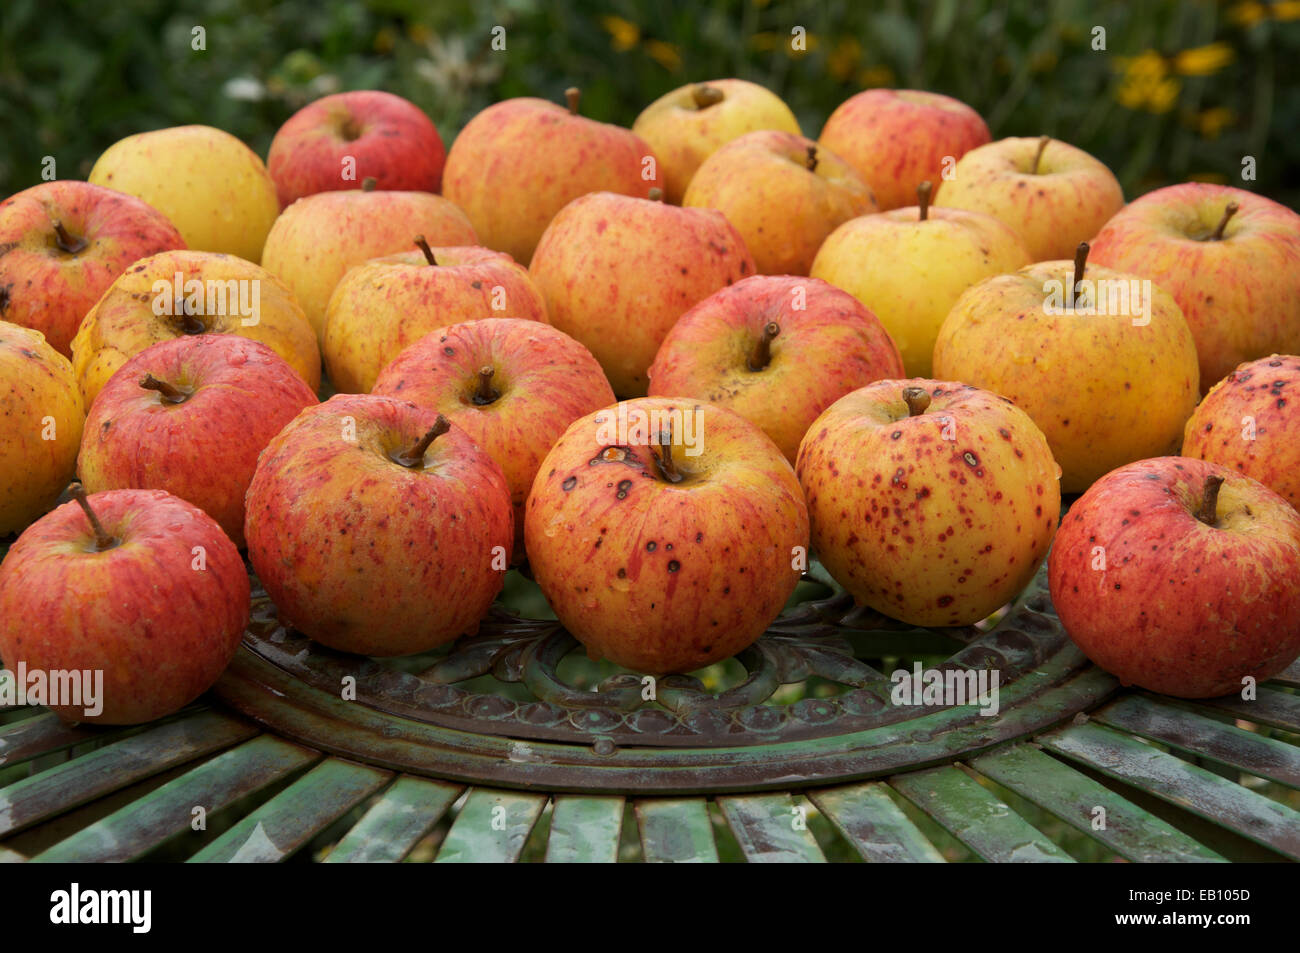 Natural, organic, tasty. Ripe eating apples, the sweet delicious fruit of the Apple tree “Malus domestica”, laid out on a metal garden table. England. Stock Photo